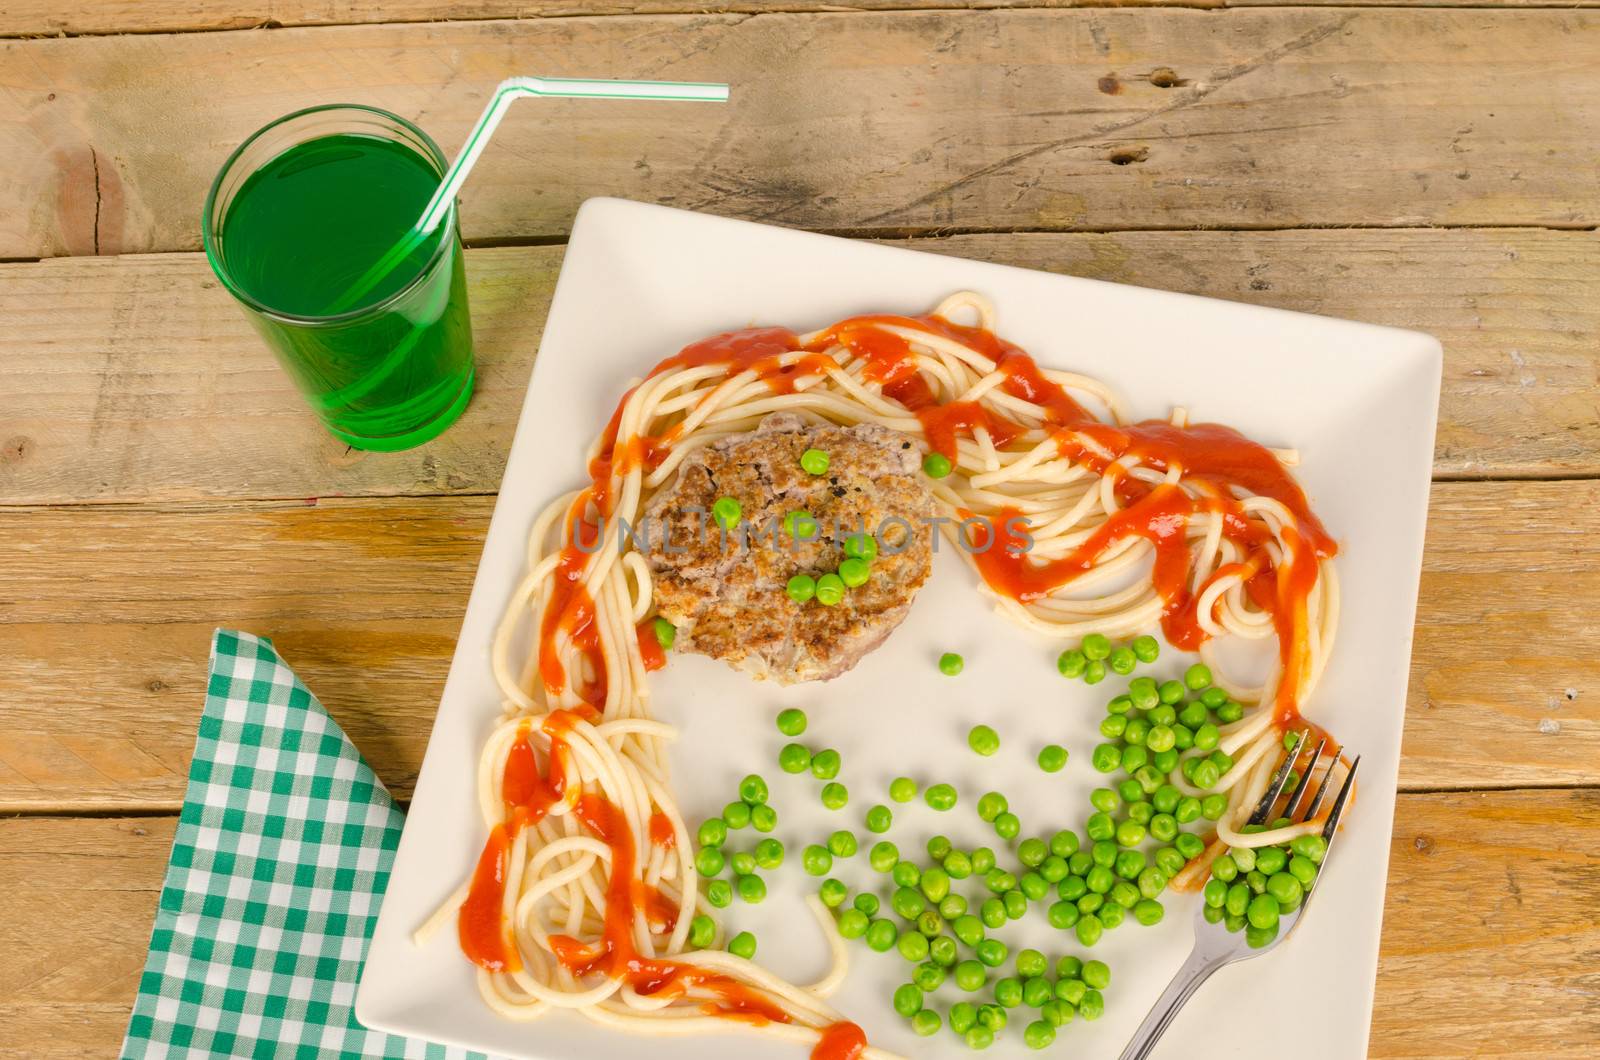 Funny burger decorated to make it an attractive kid meal